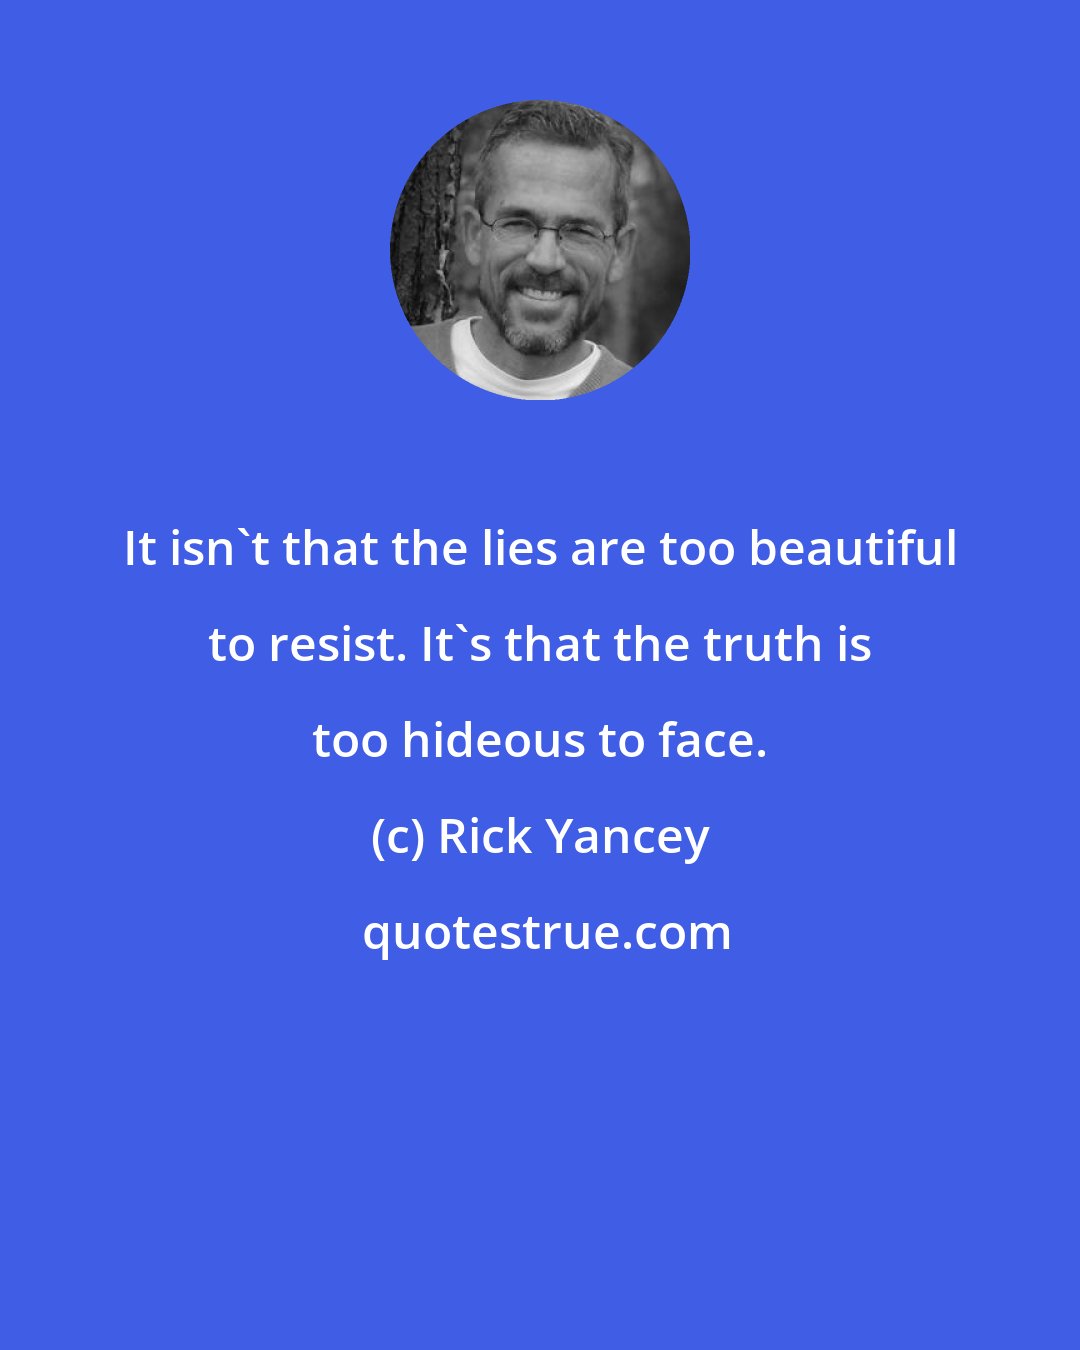 Rick Yancey: It isn't that the lies are too beautiful to resist. It's that the truth is too hideous to face.